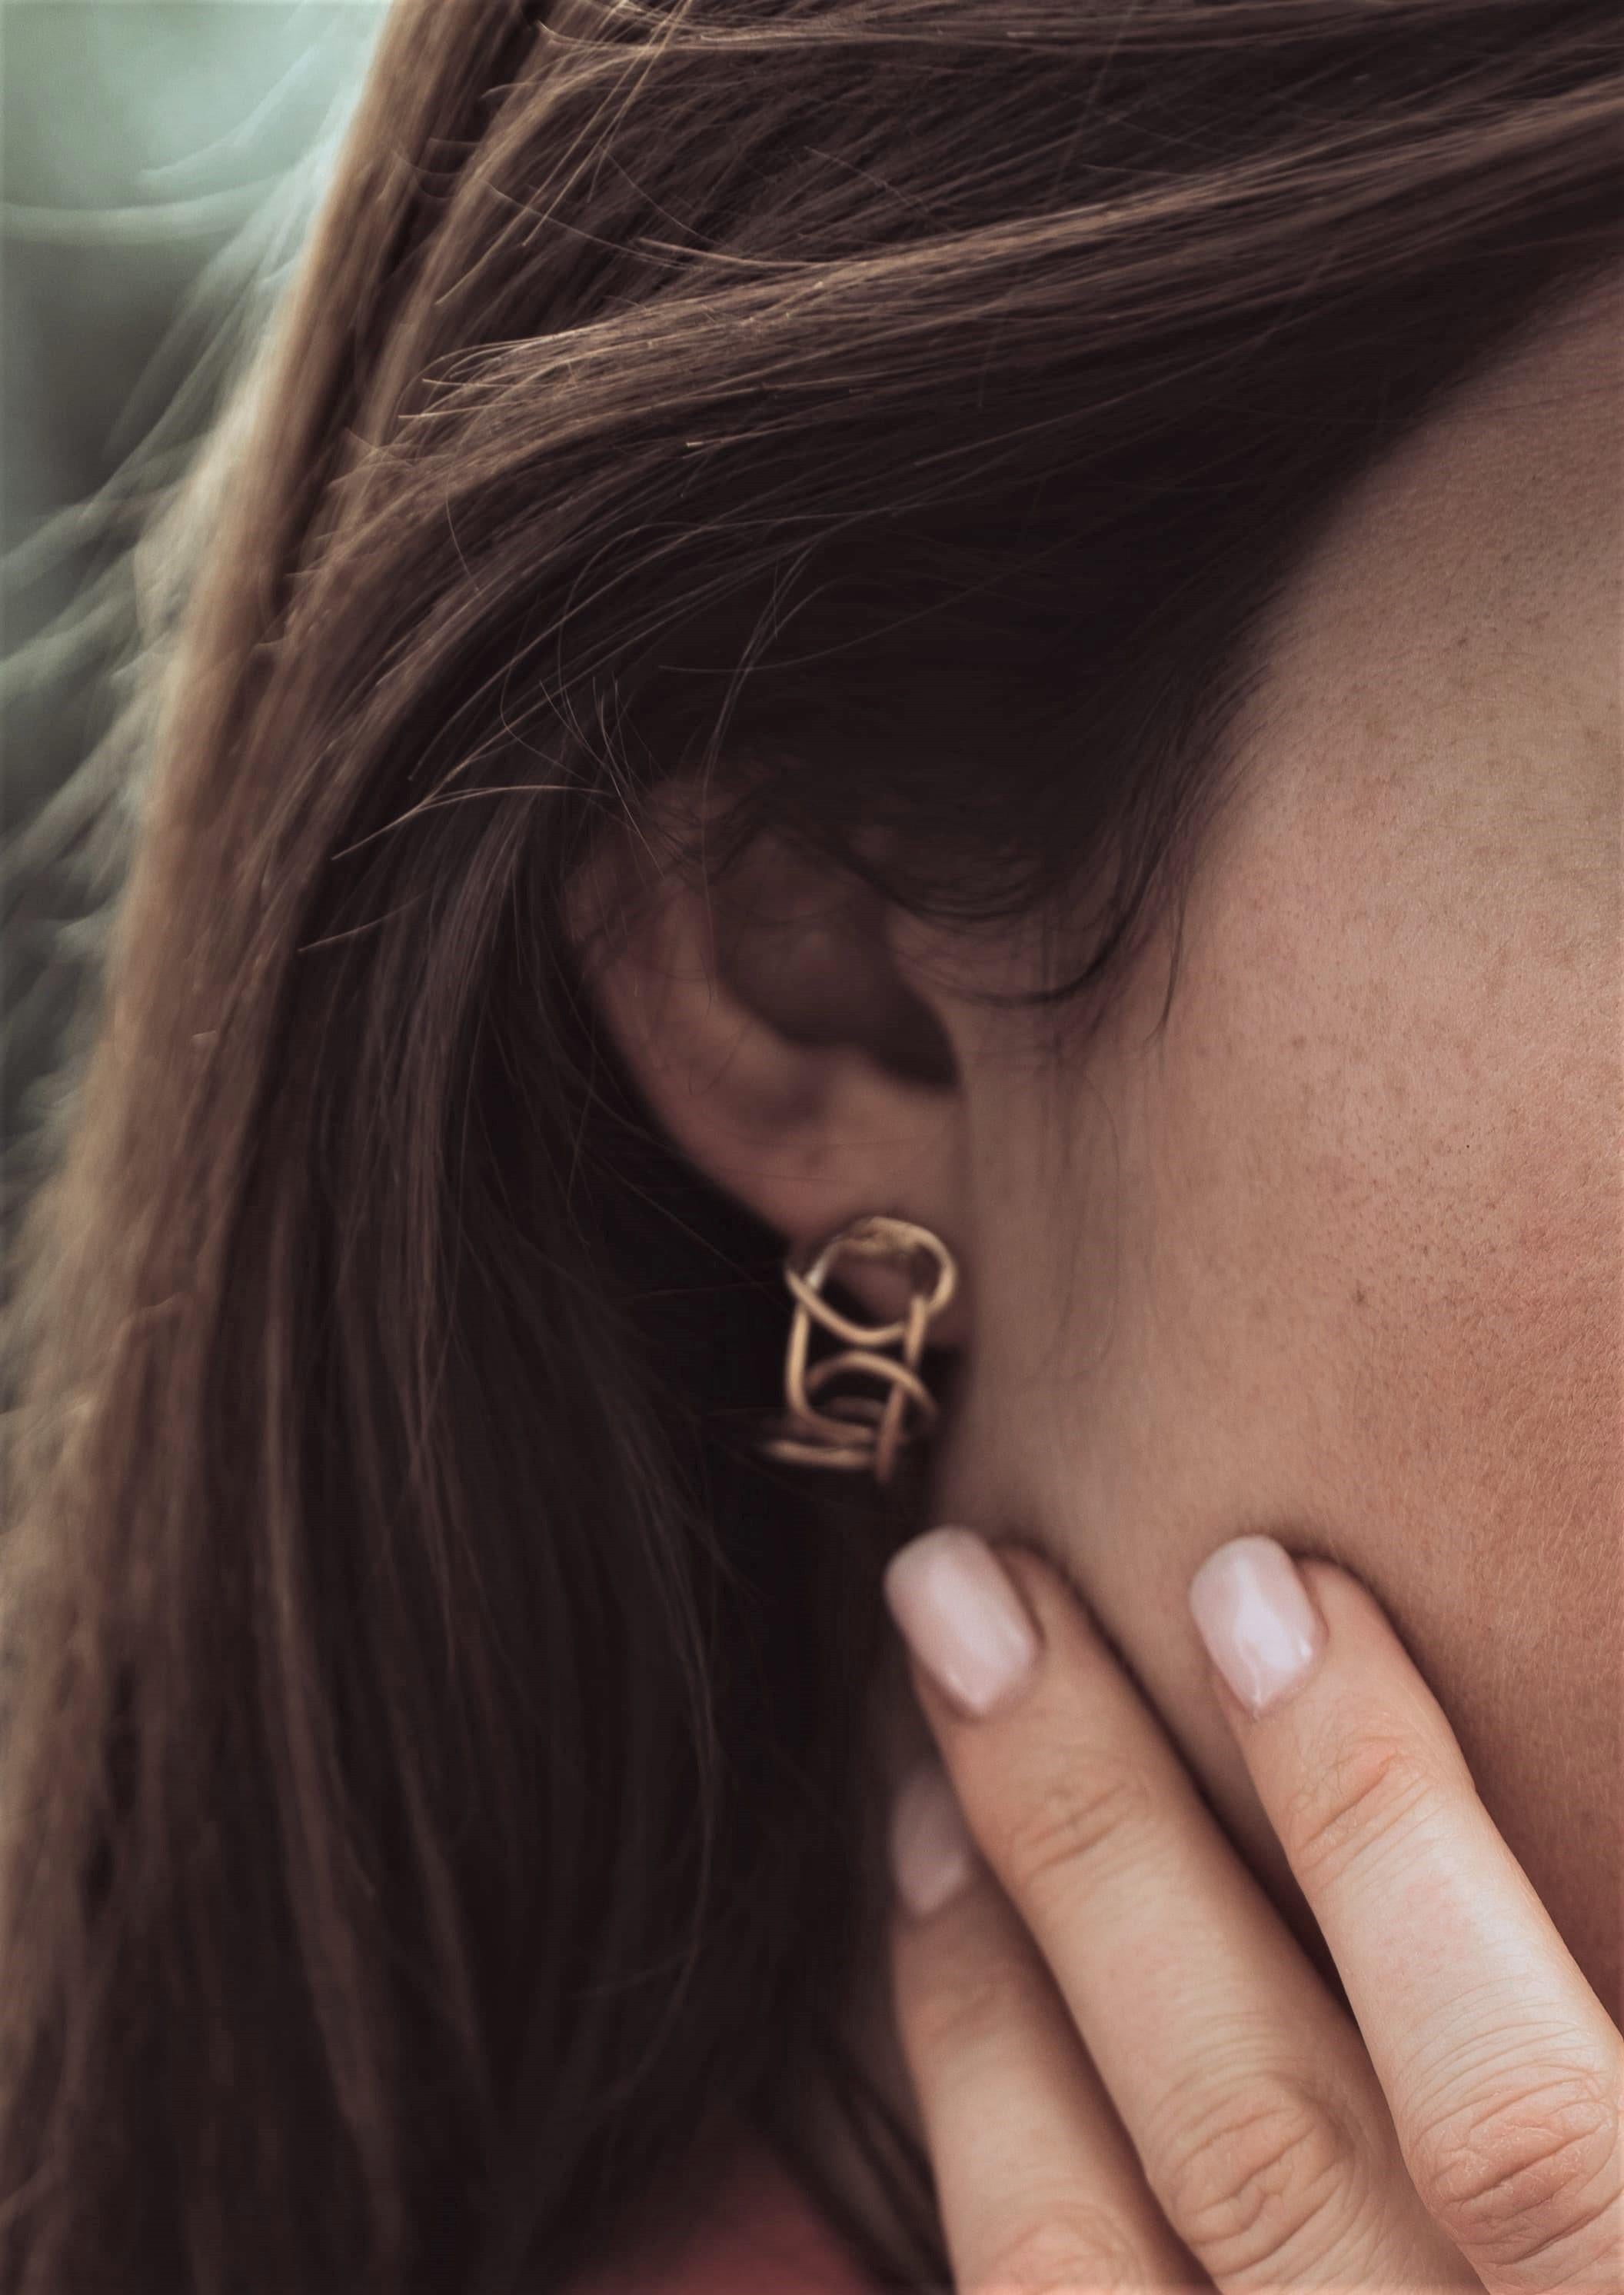 Giulia Barela Jewelry is handmade in the heart of Rome, Italy by master goldsmiths. All of our gold jewelry is unique. No two pieces are exactly the same because they are all handmade in gold. Giulia Barela designs her jewelry based on the beauty of